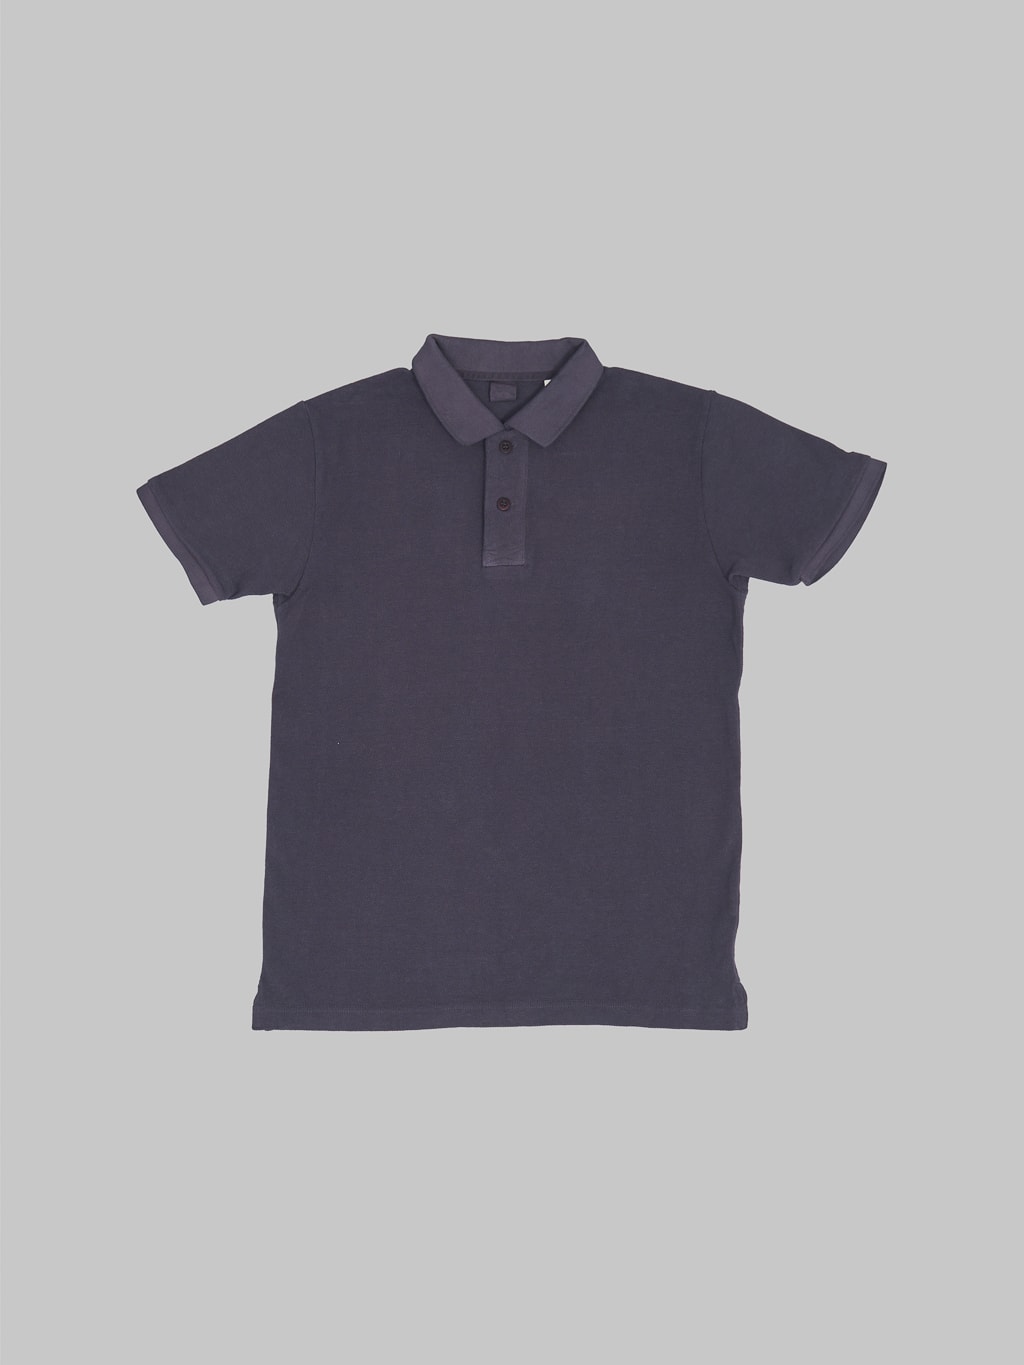 ues polo shirt navy front view